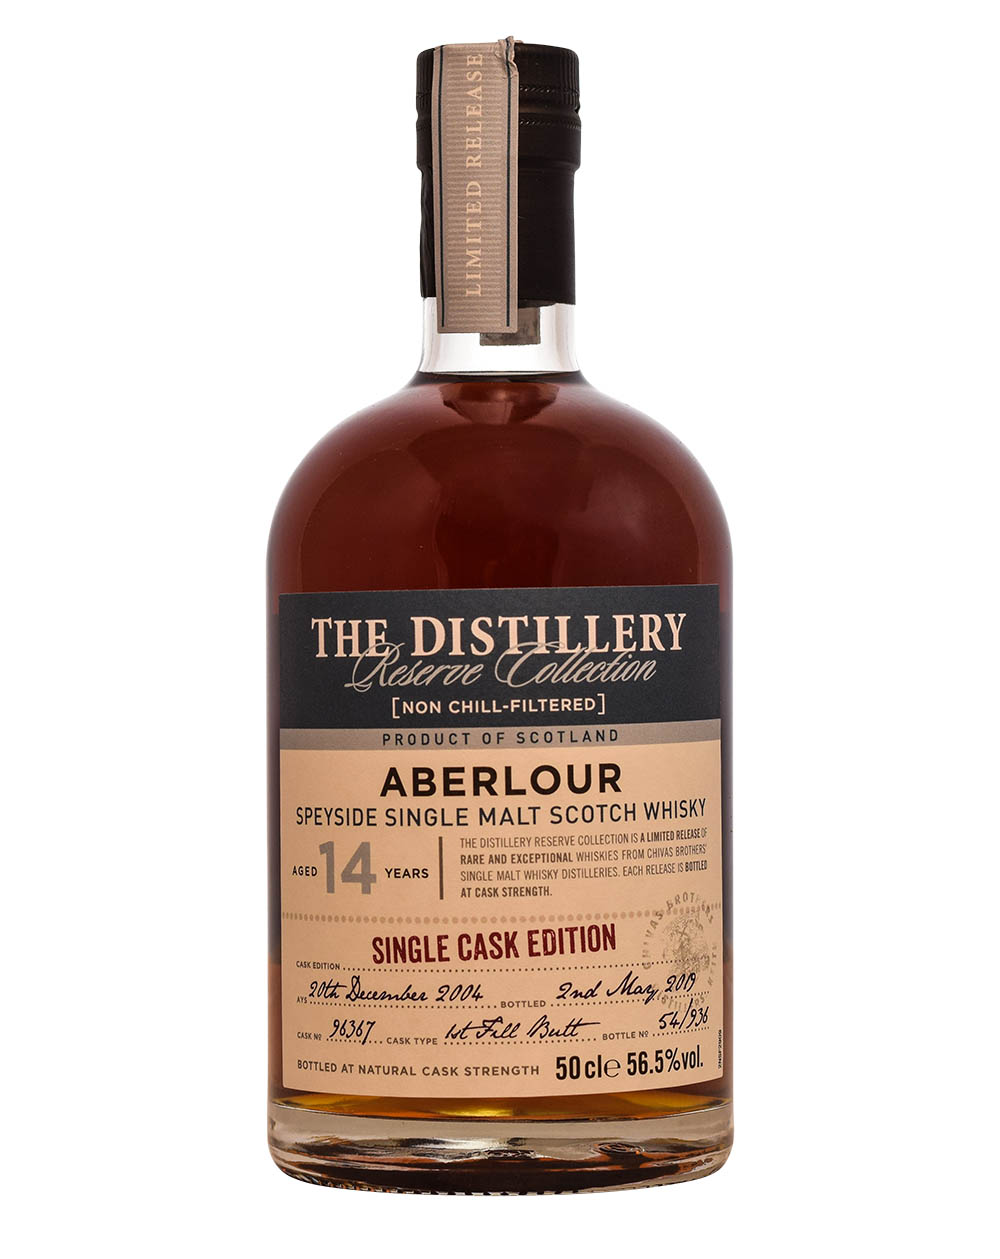 Aberlour 14 Years Old Distillery Reserve Collection Cask 96367 2004